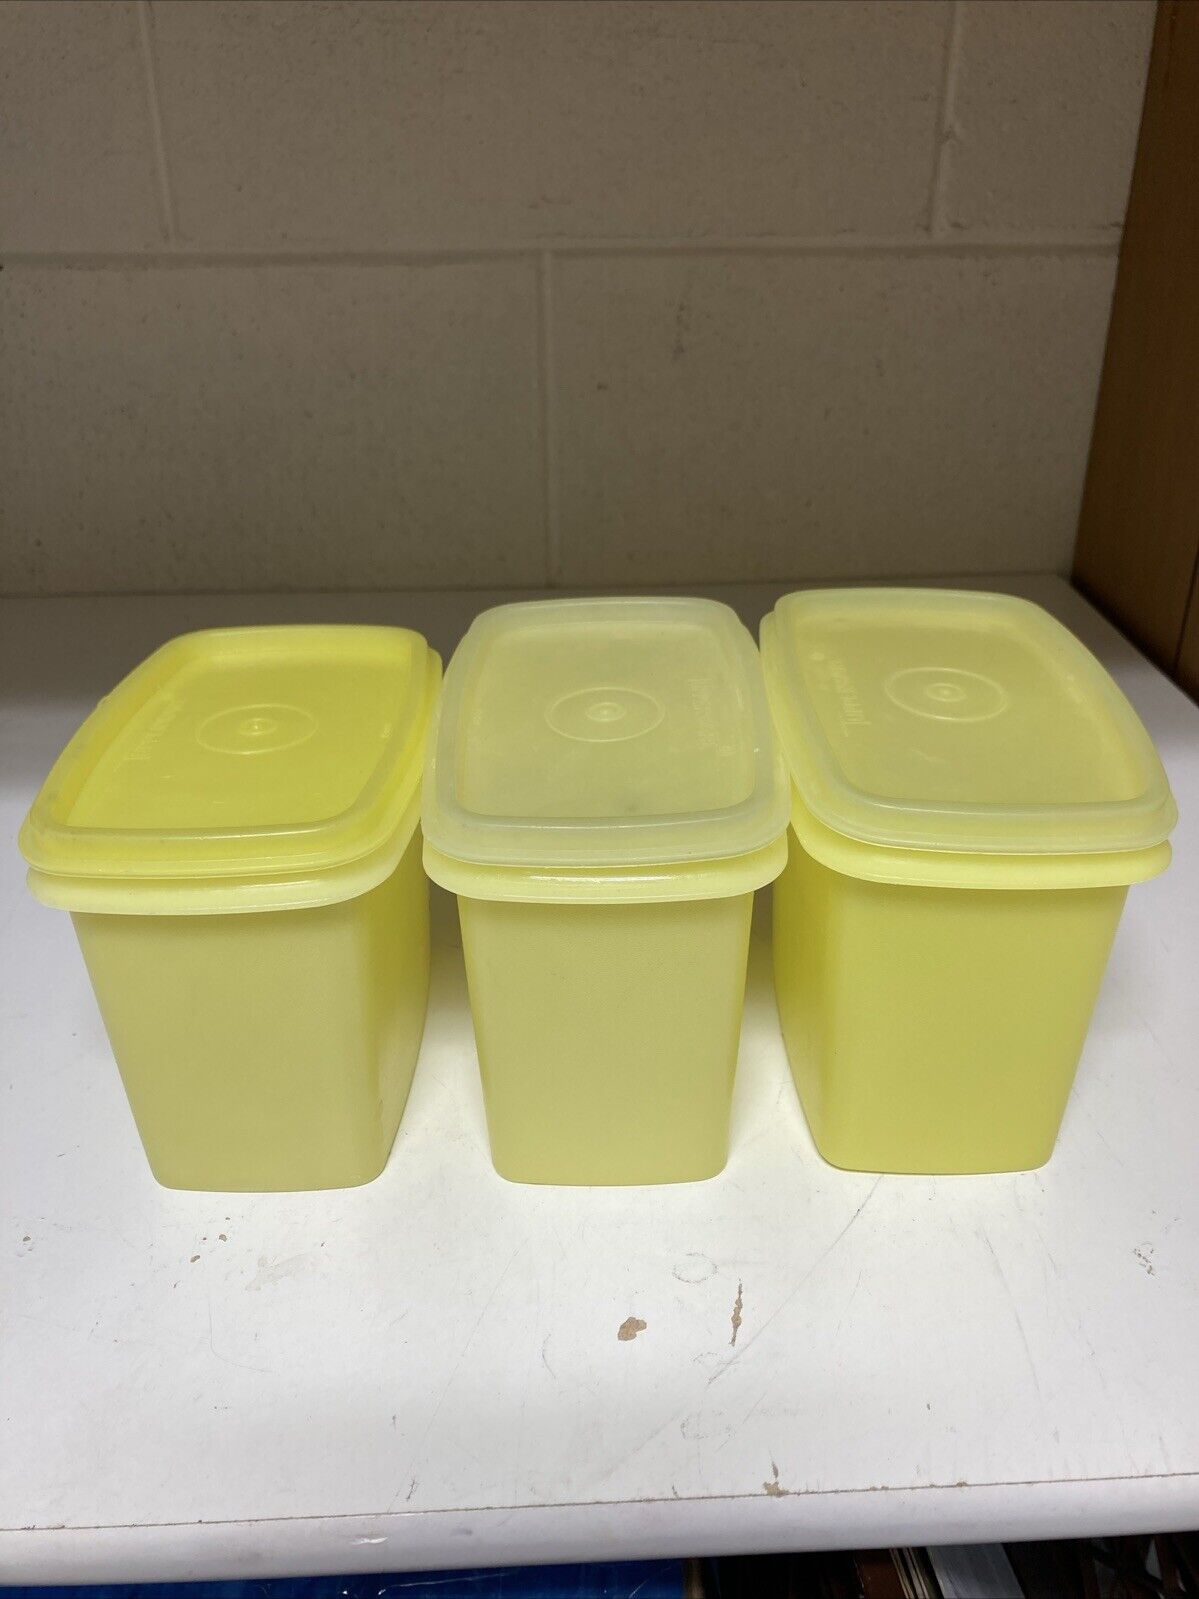 VTG Lot Of 3 Tupperware 1243 Rectangular Containers Storage W/ Lids Yellow Sugar